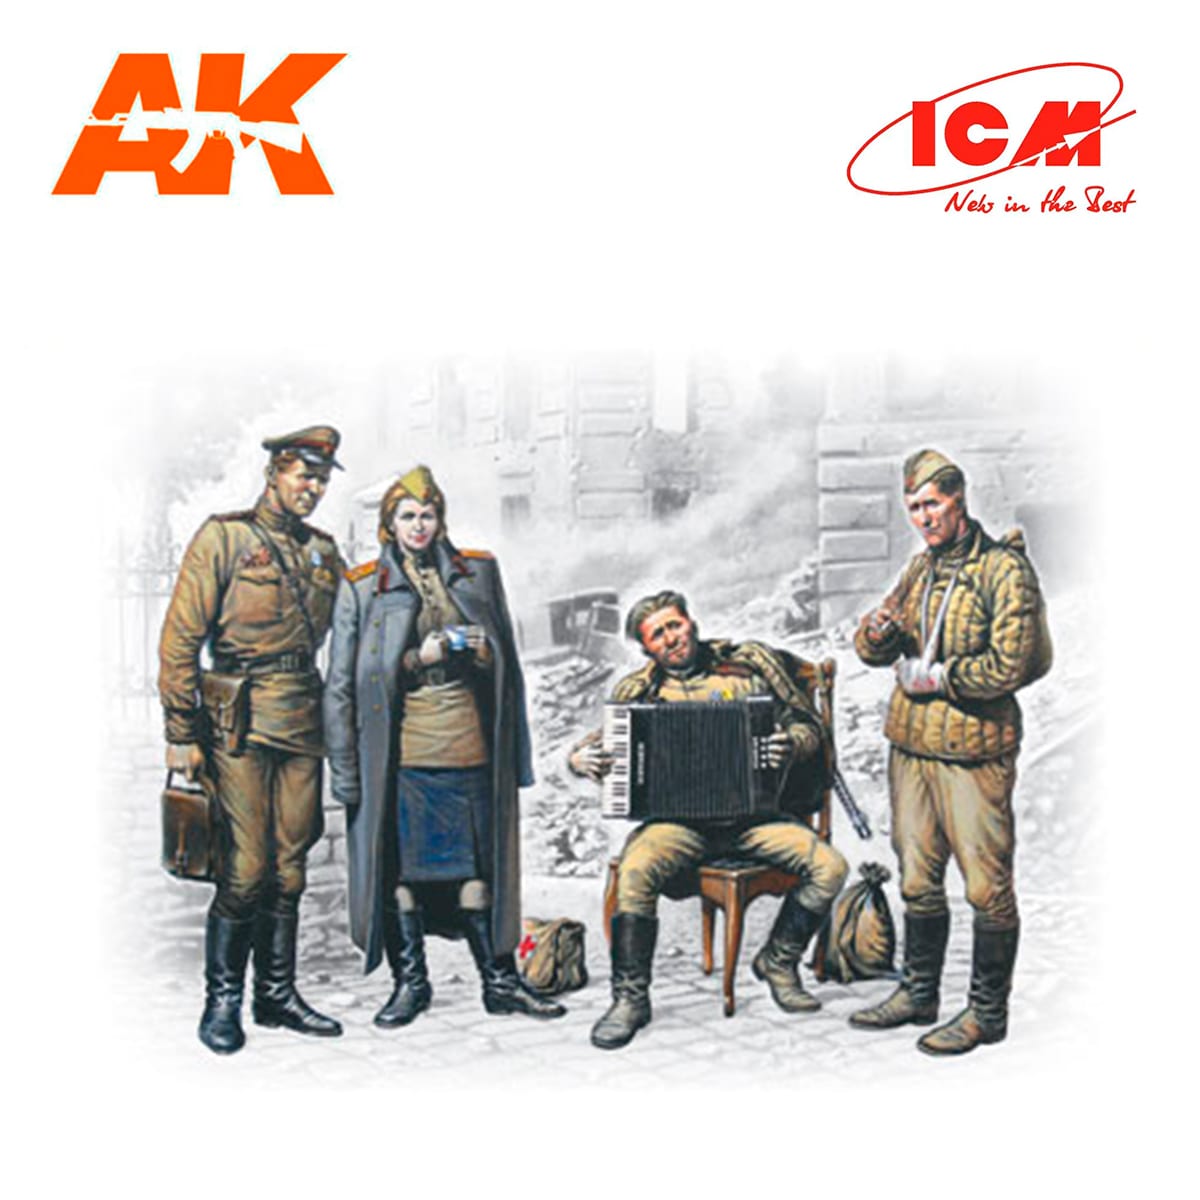 May 1945 (4 figures – 1 officer, 2 soldiers, 1 military servicewoman) 1/35